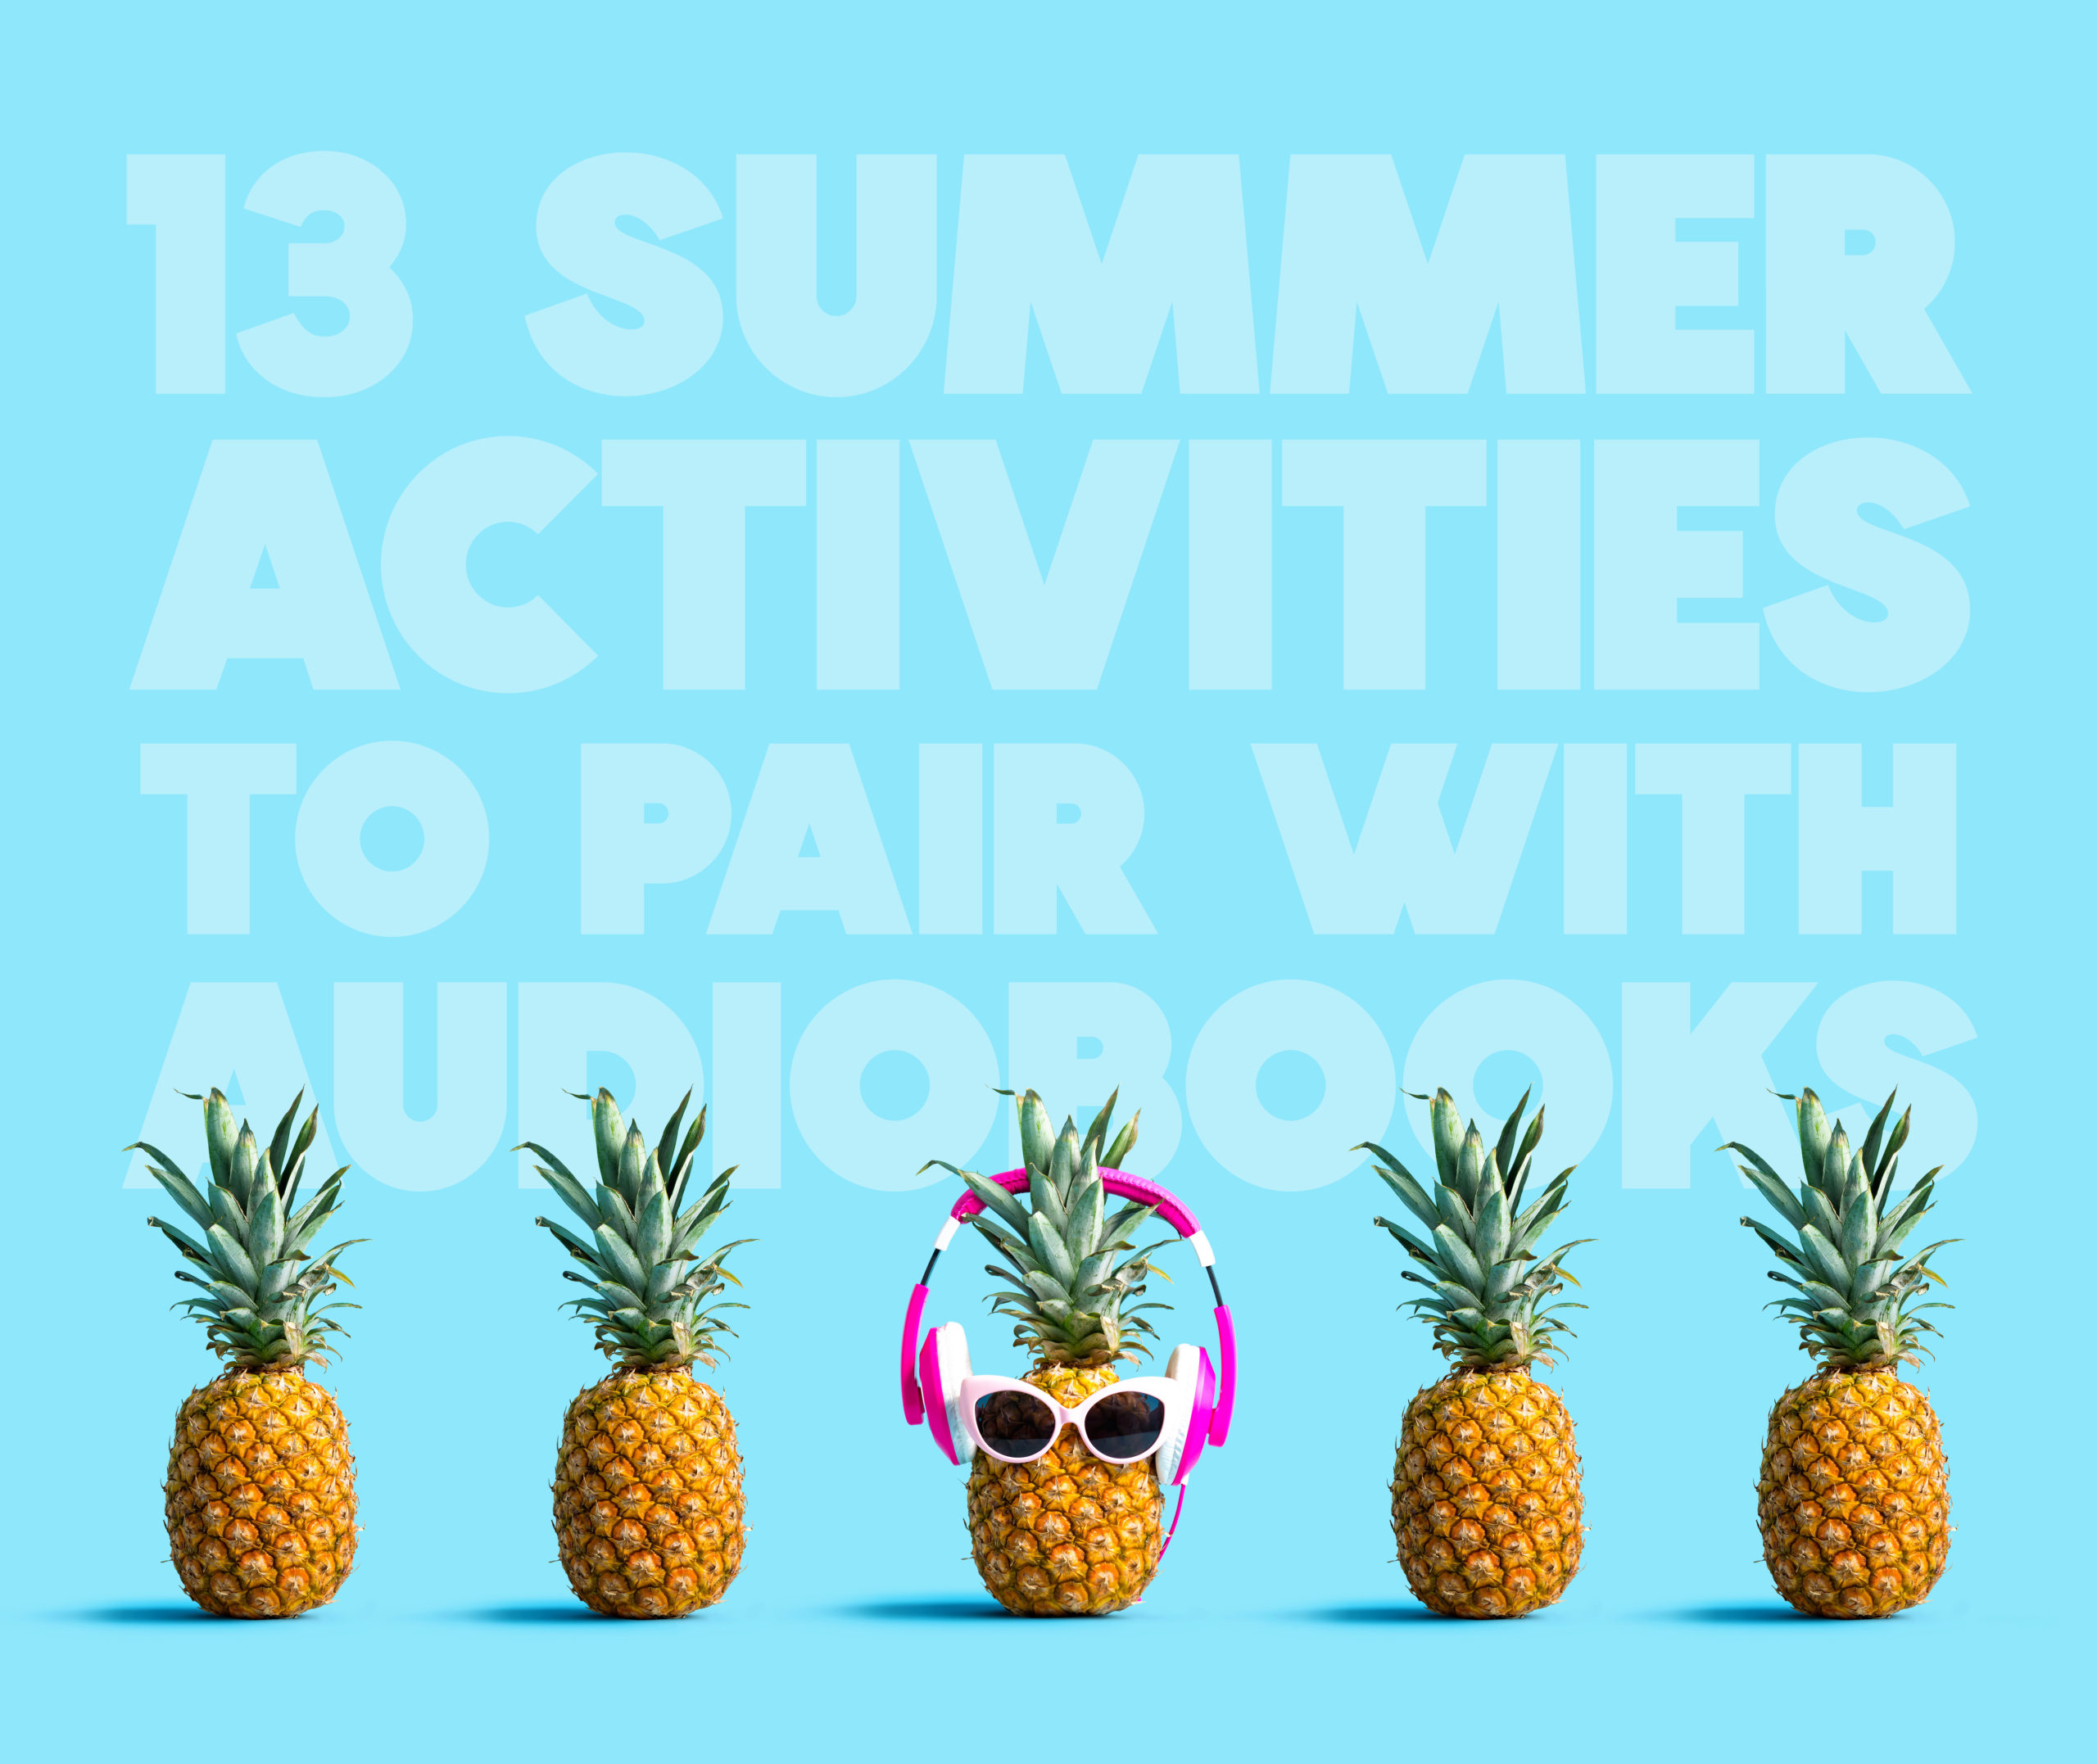 13 Summer Activities to Audiobooks Pair - Libro.fm with Audiobooks